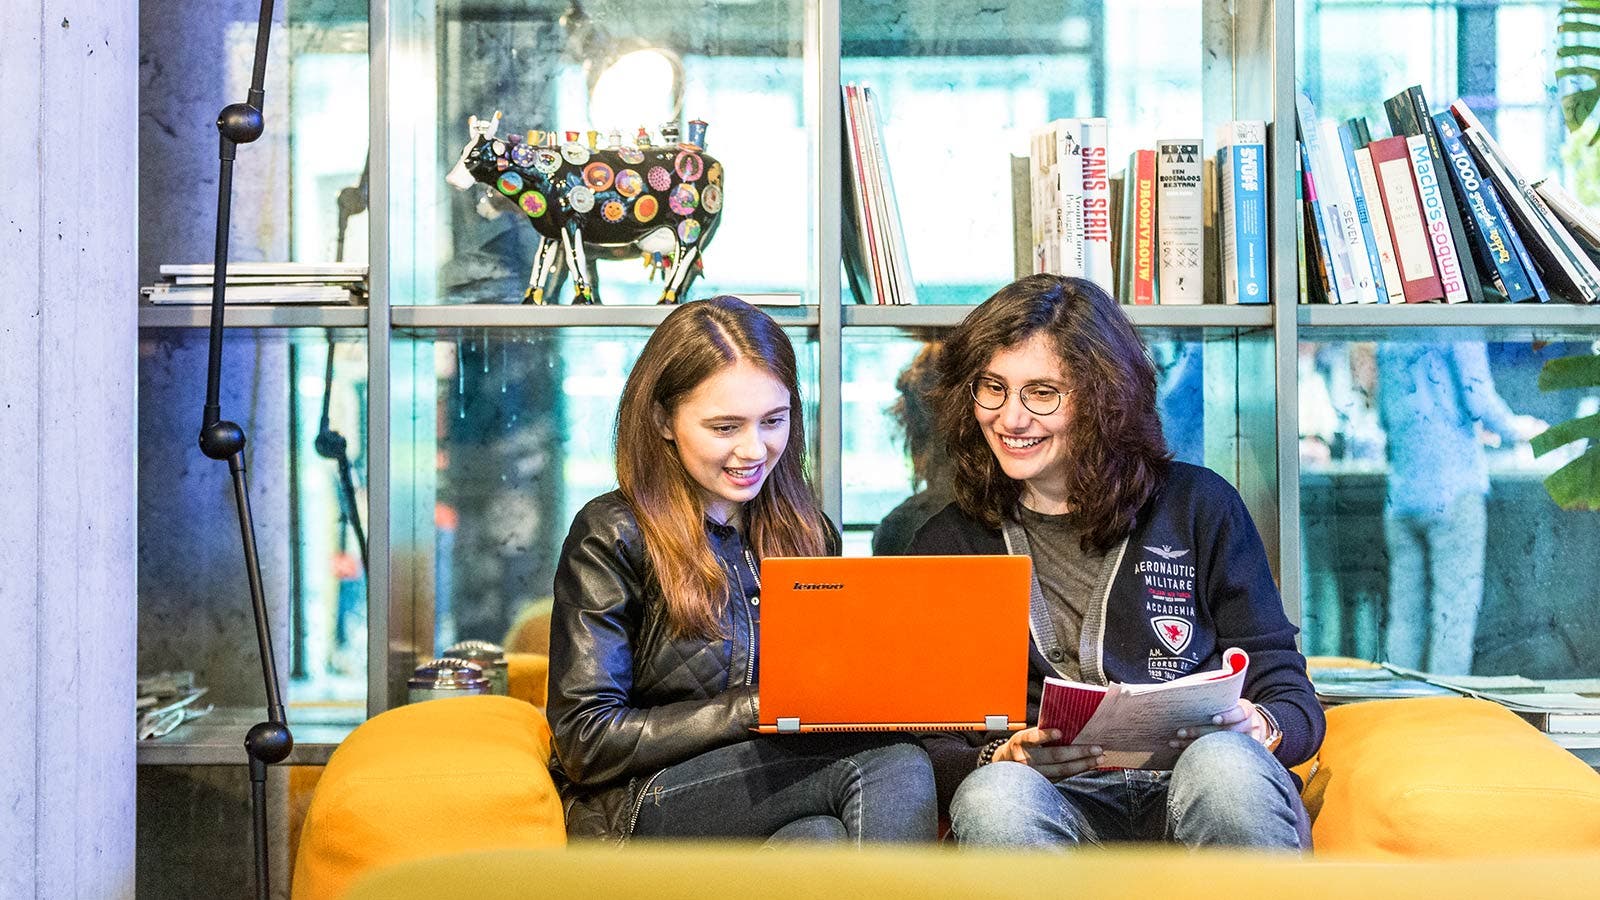 Two students sitting in library and studying together